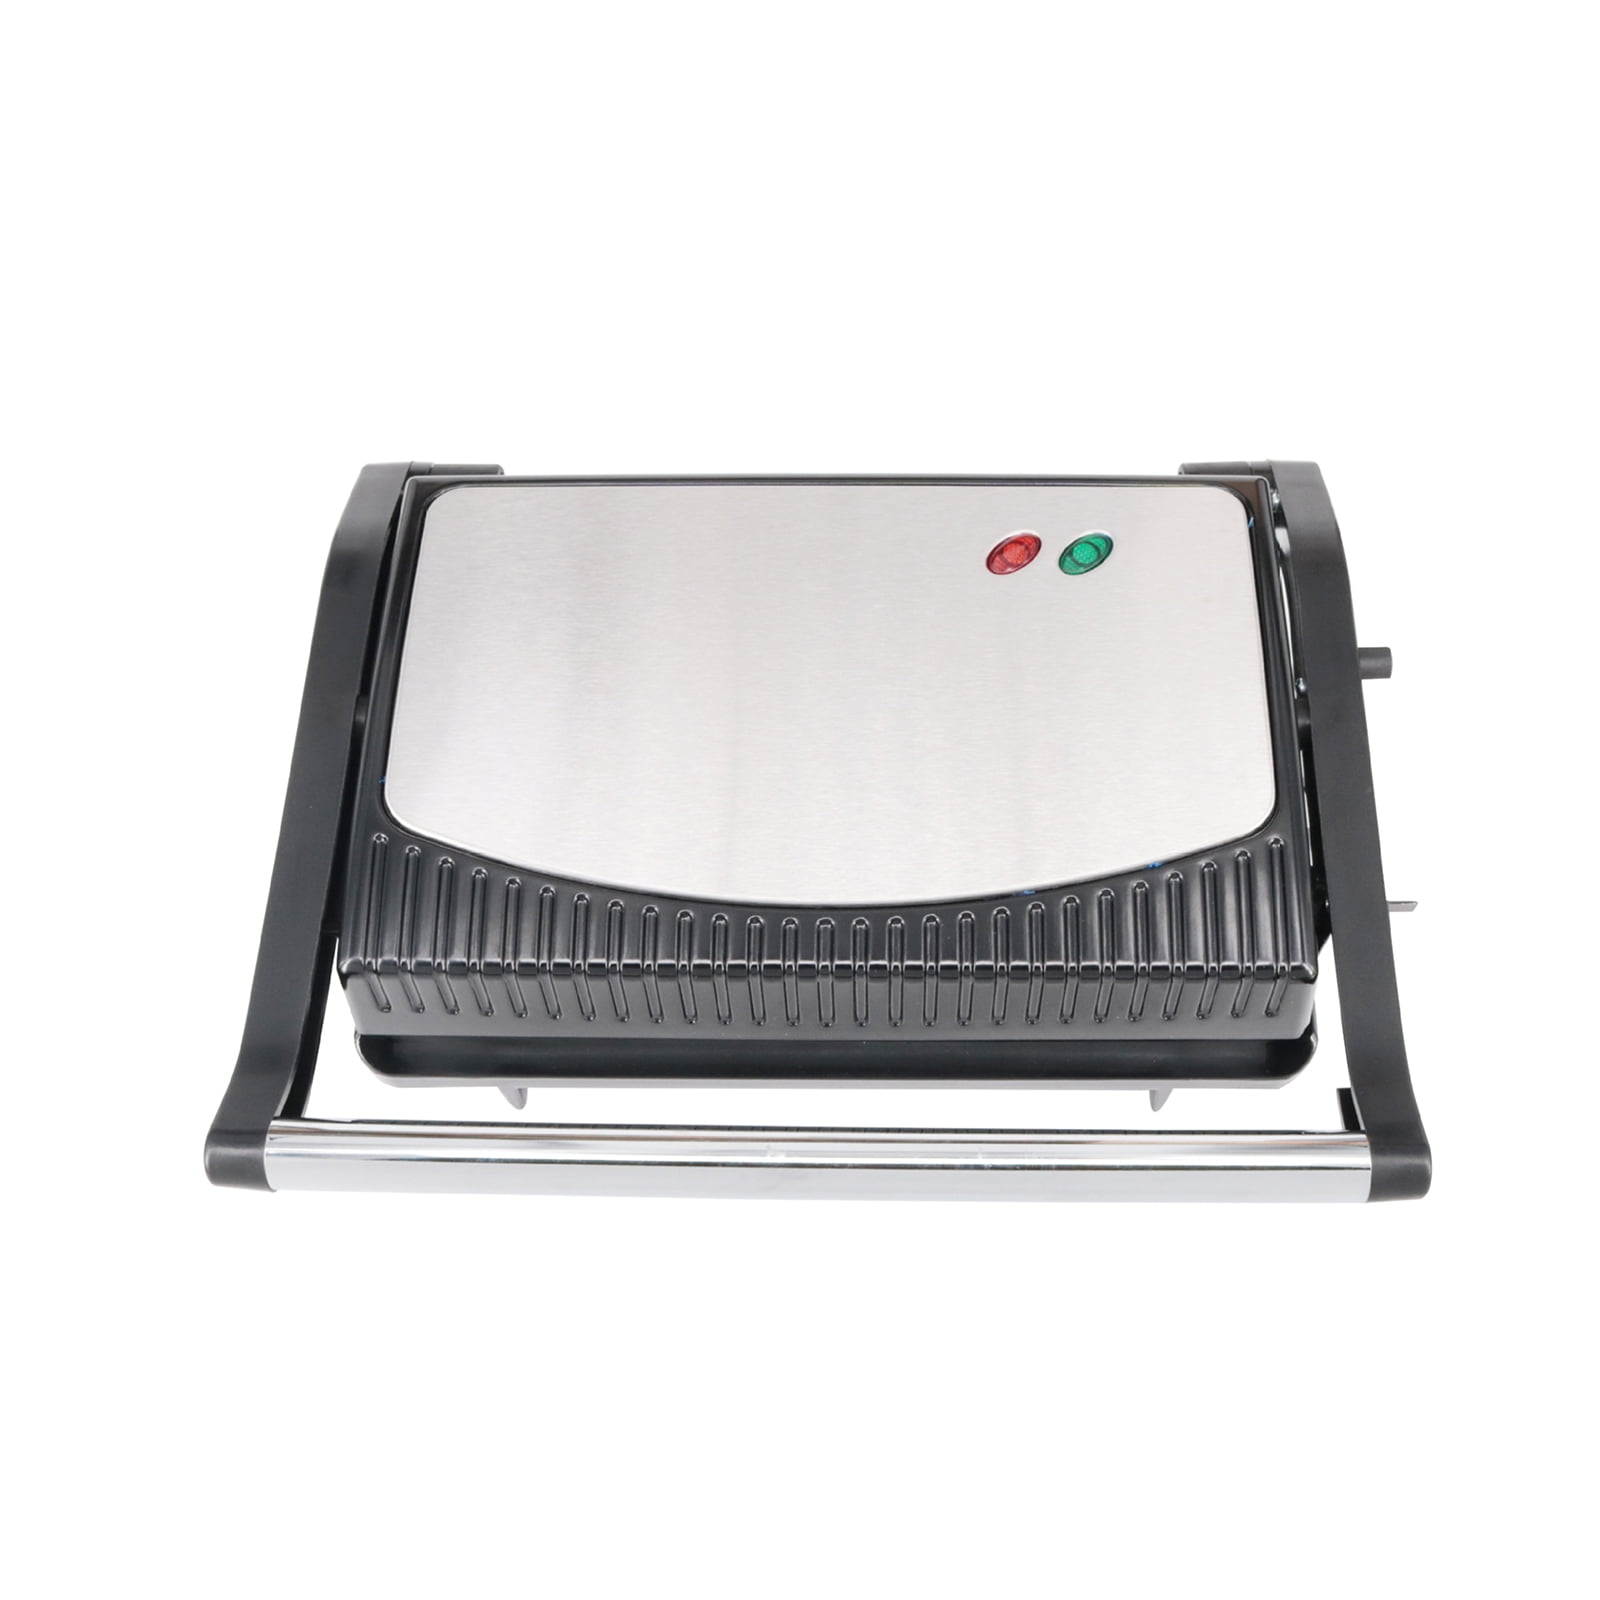 Tiastar Contact Grill for Sandwiches, Steak and Panini Grill, Sandwich  Maker with Non-Stick Coating, Open 180°, Light Display, 1000W, Black